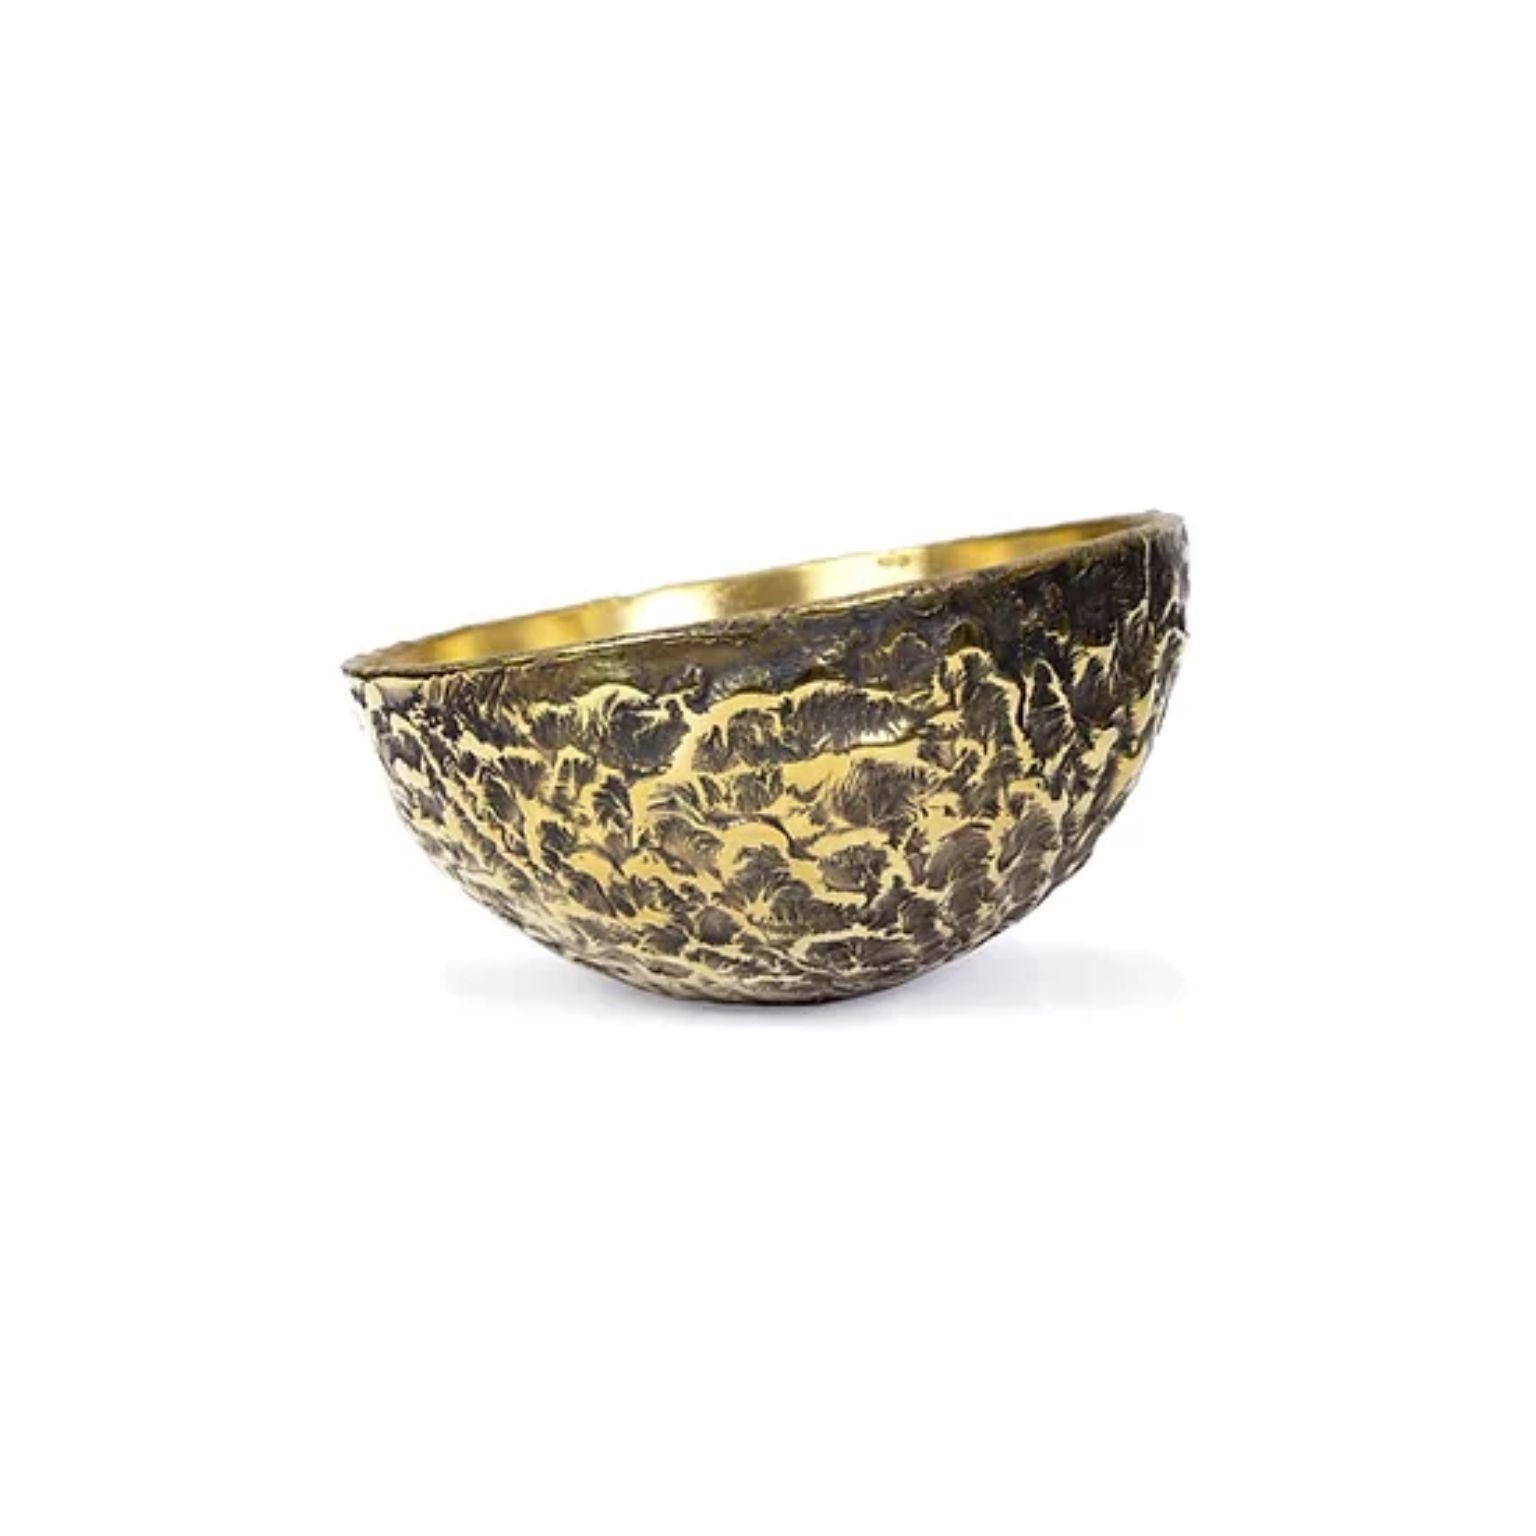 Brass hand sculpted POD bowl by Samuel Costantini
Entirely handmade by the artist
Edition 18 + 2 AP
Measures: D 12 x H 6 cm
Materials: Brass

Samuel Costantini
The ability to create objects lies in the tradition in our hands. In ancient